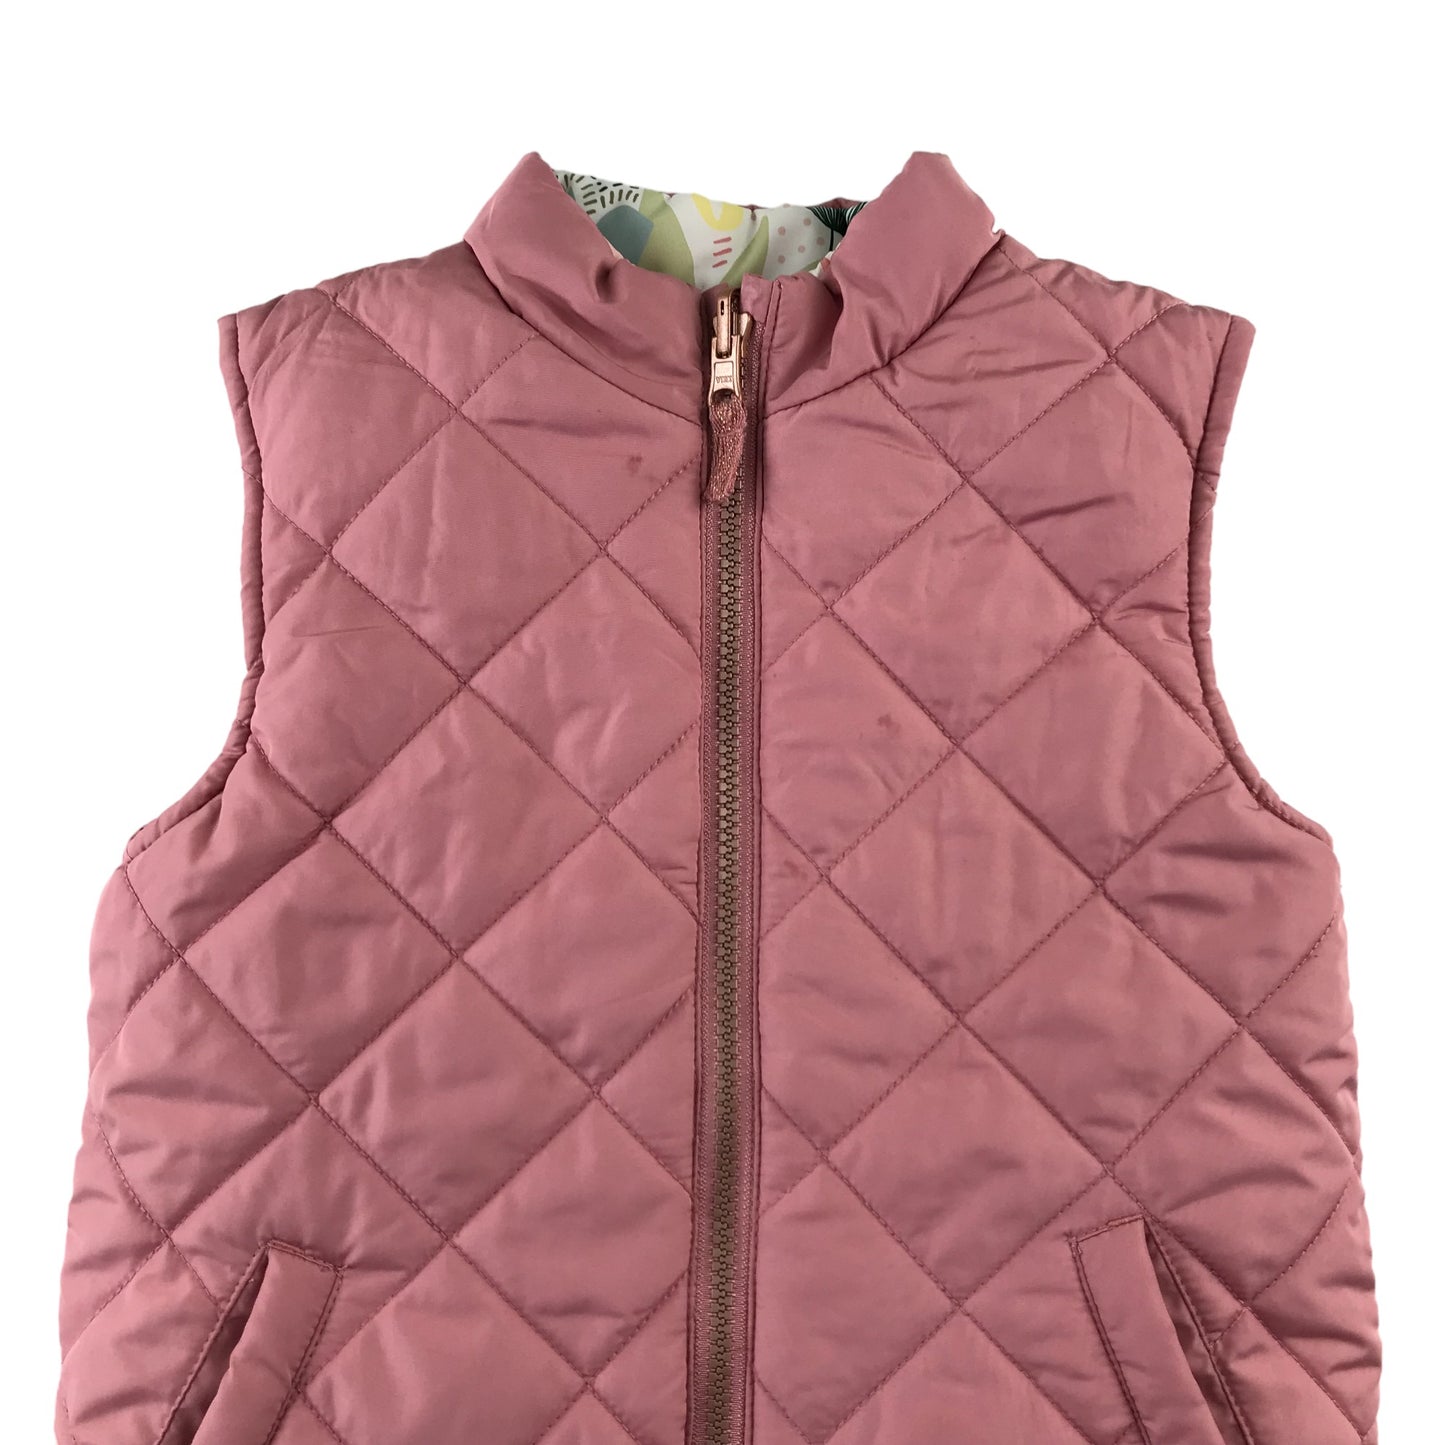 Nutmeg reversible gilet 5-6 years pink and white floral puffer